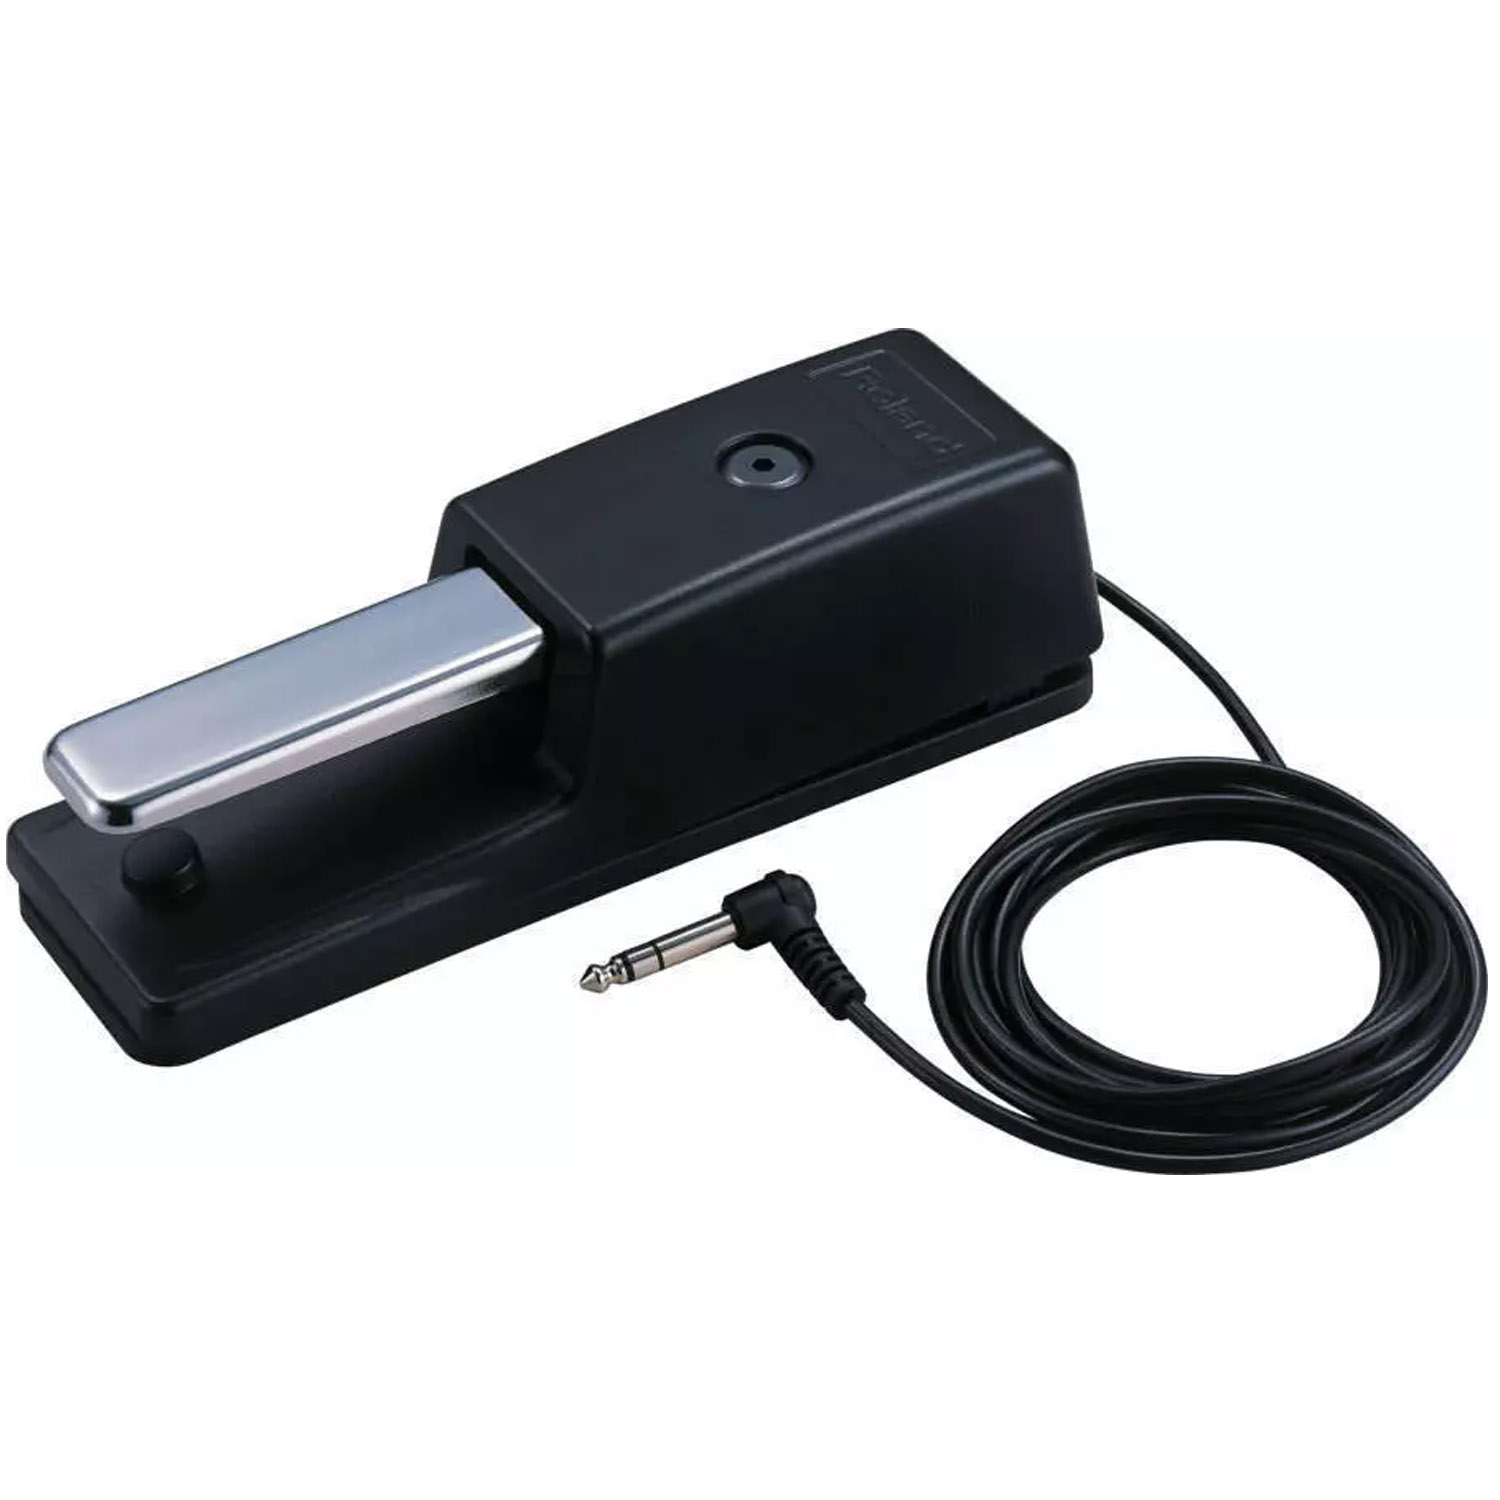 Image of a Roland DP-10 Sustain pedal with cable coiled up.